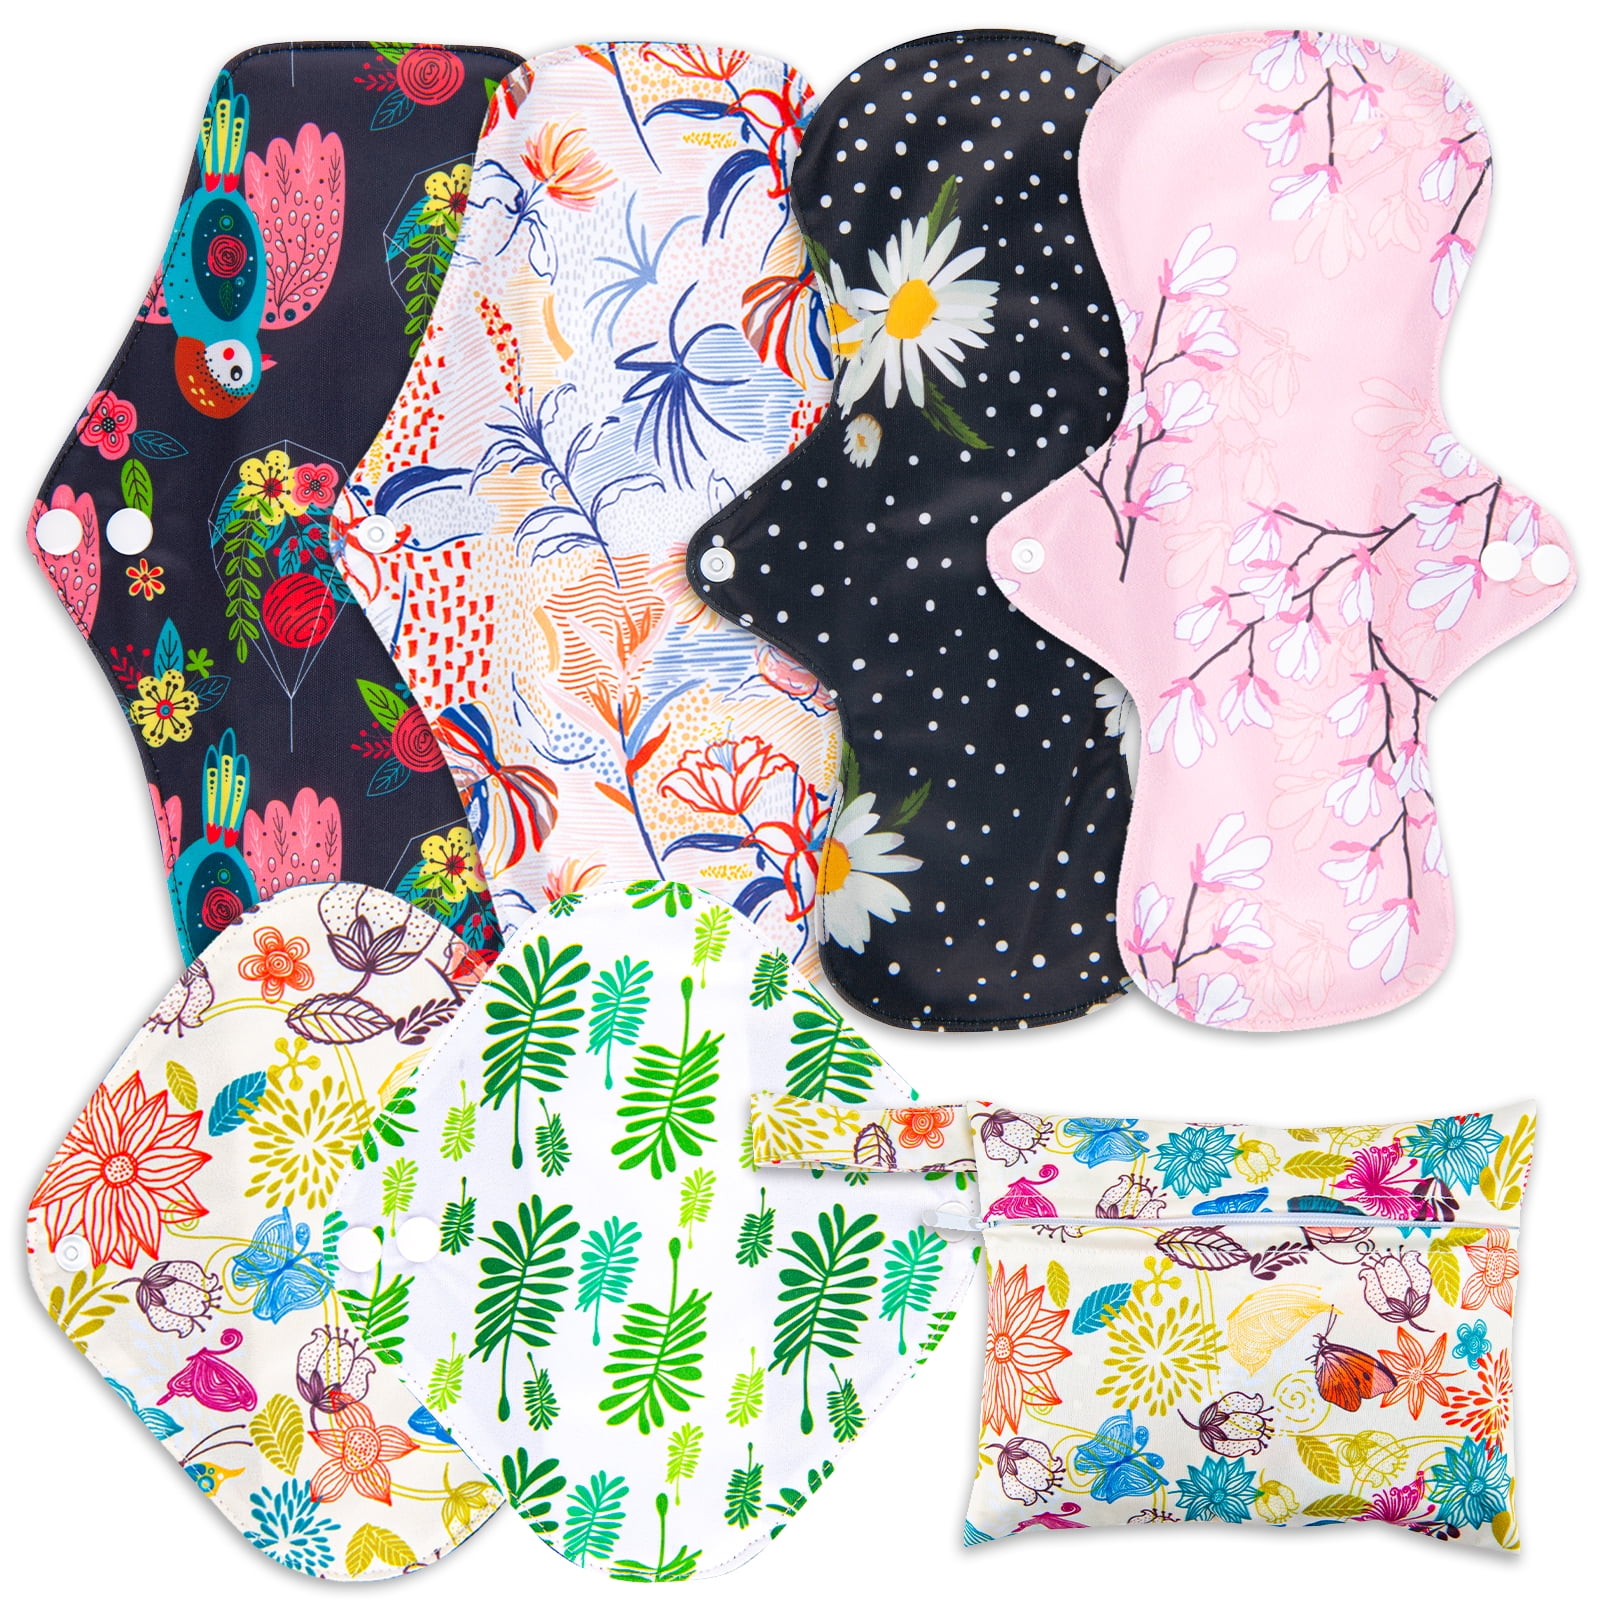 7 in 1 Reusable Menstrual Pads，6 PCs Sanitary Pad Set with Wings Waterproof  Washable Sanitary Menstrual Cloth Pads Panty Liners for Women